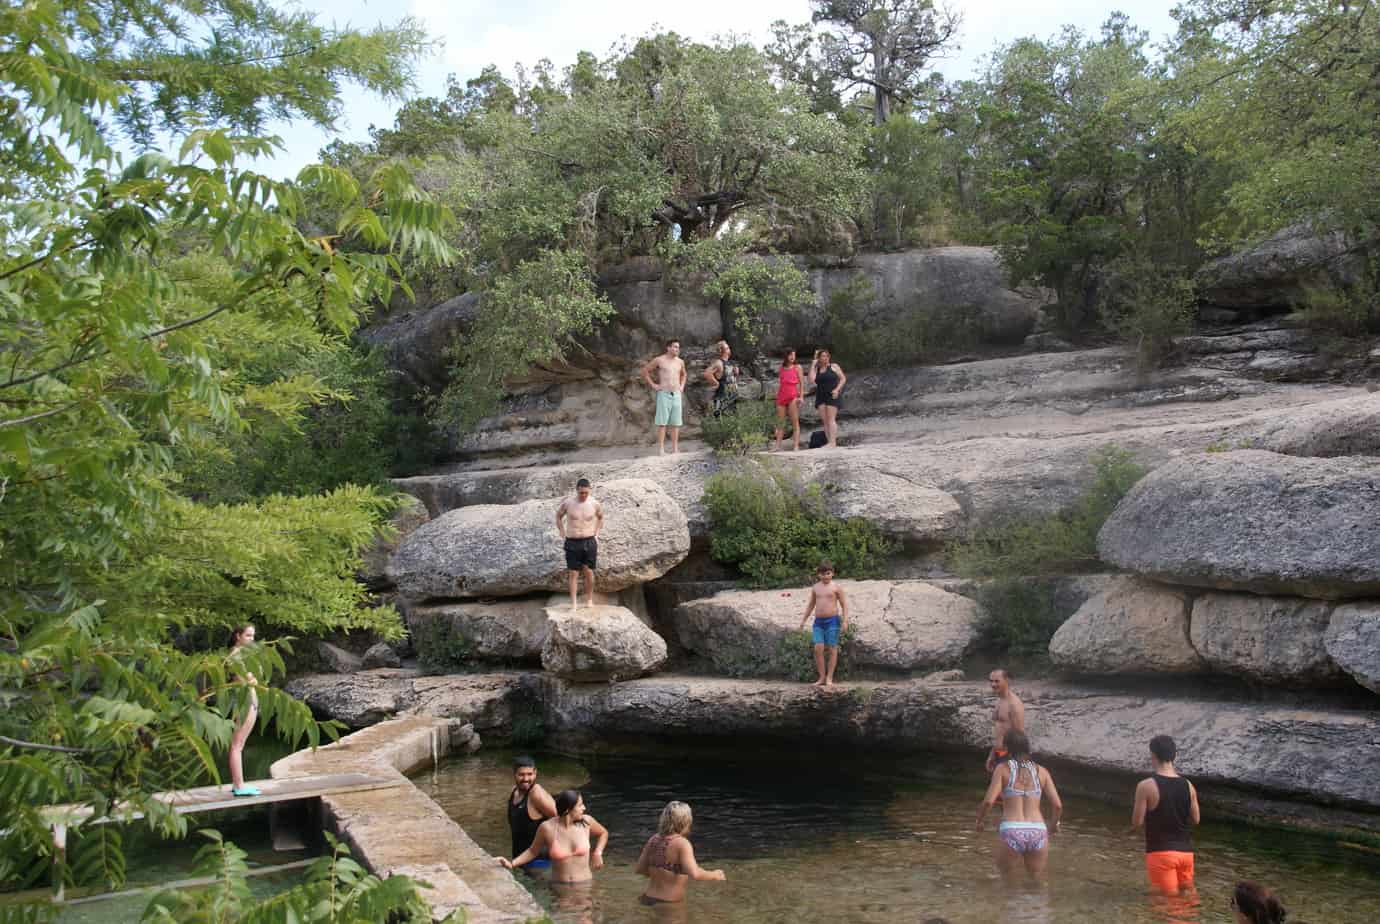 Hiking the hills of the Wimberley Valley